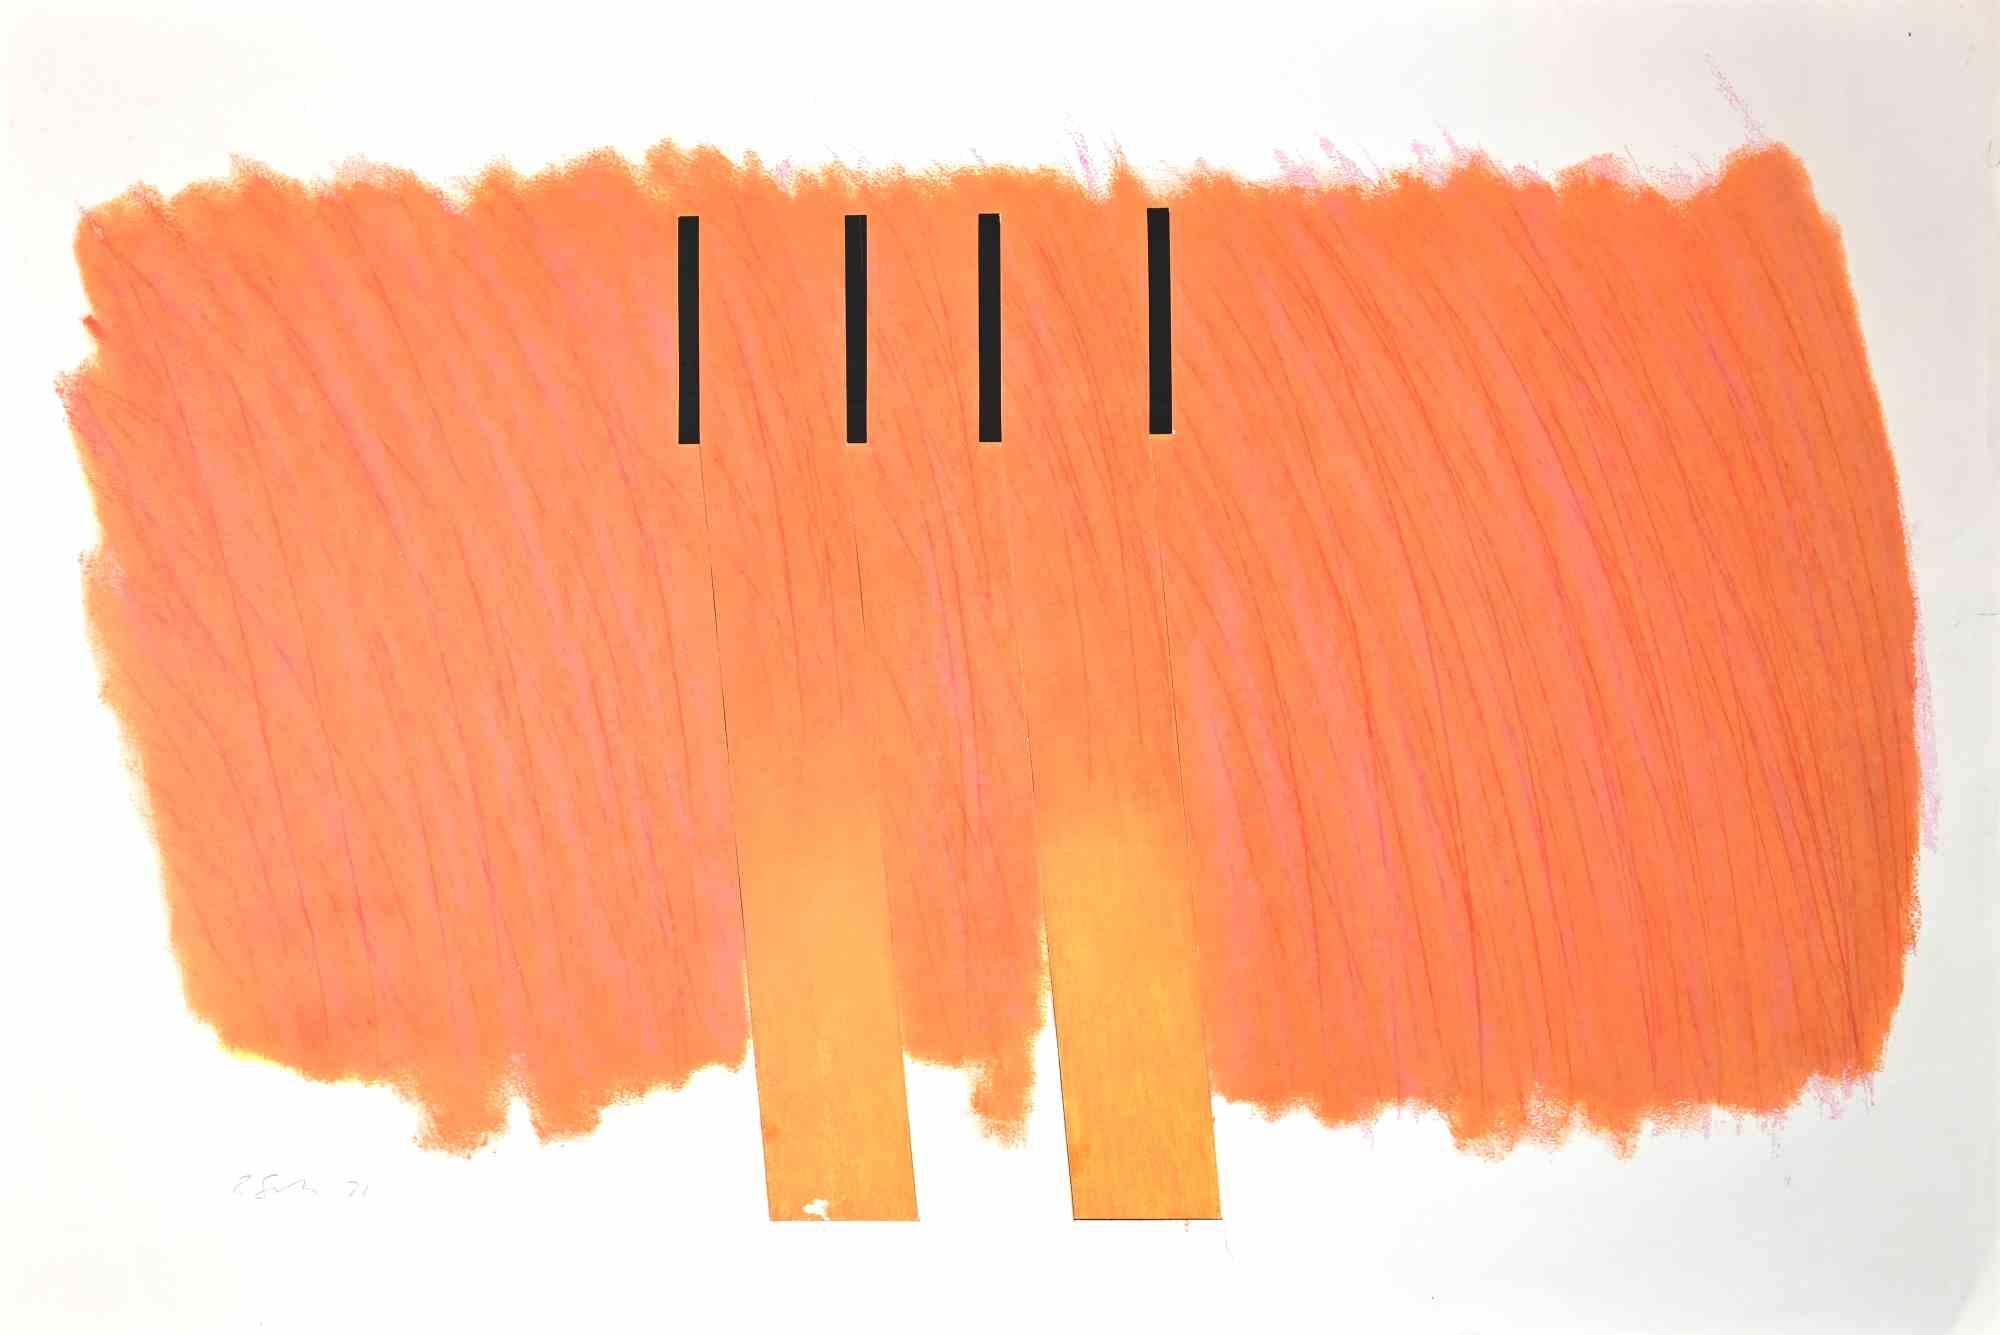 Composition is original lithography artwork on paper realized in 1971 by Richard Smith.

Good conditions aged margins with some slight cutting and fold.

Abstract minimalistic expression, through pink and orange, and interesting artwork, playful